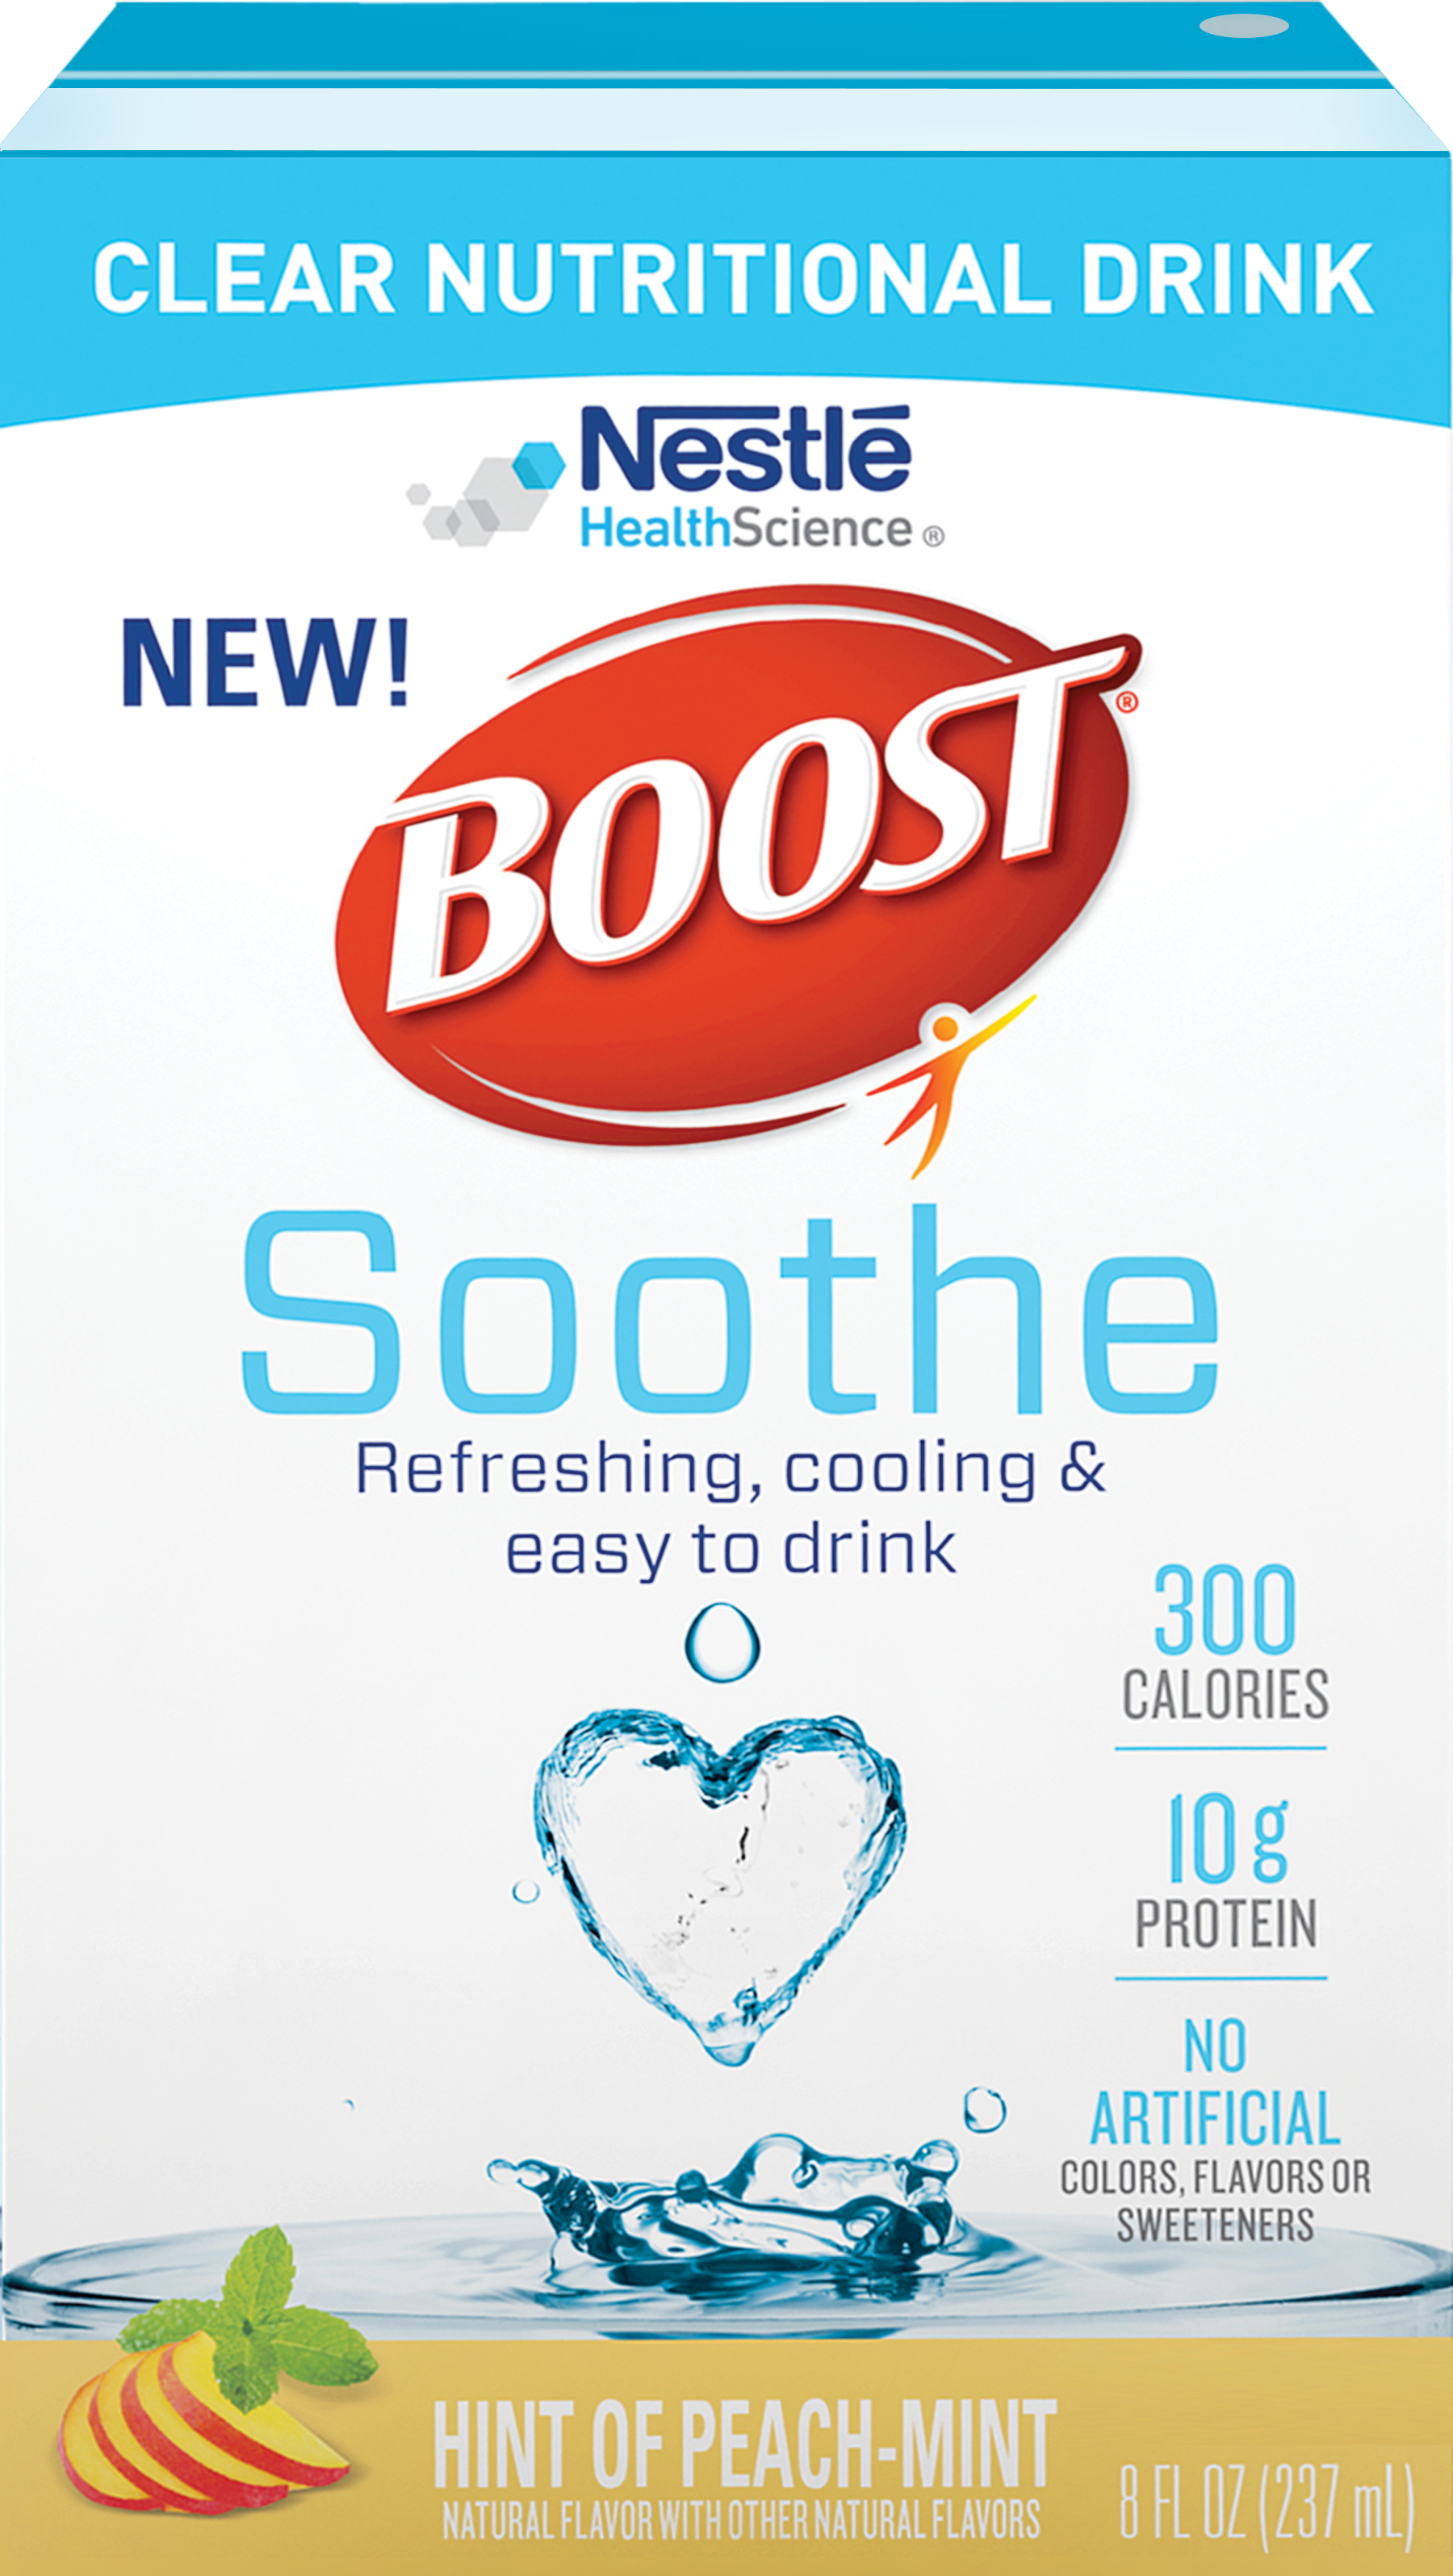 BOOST Soothe logo